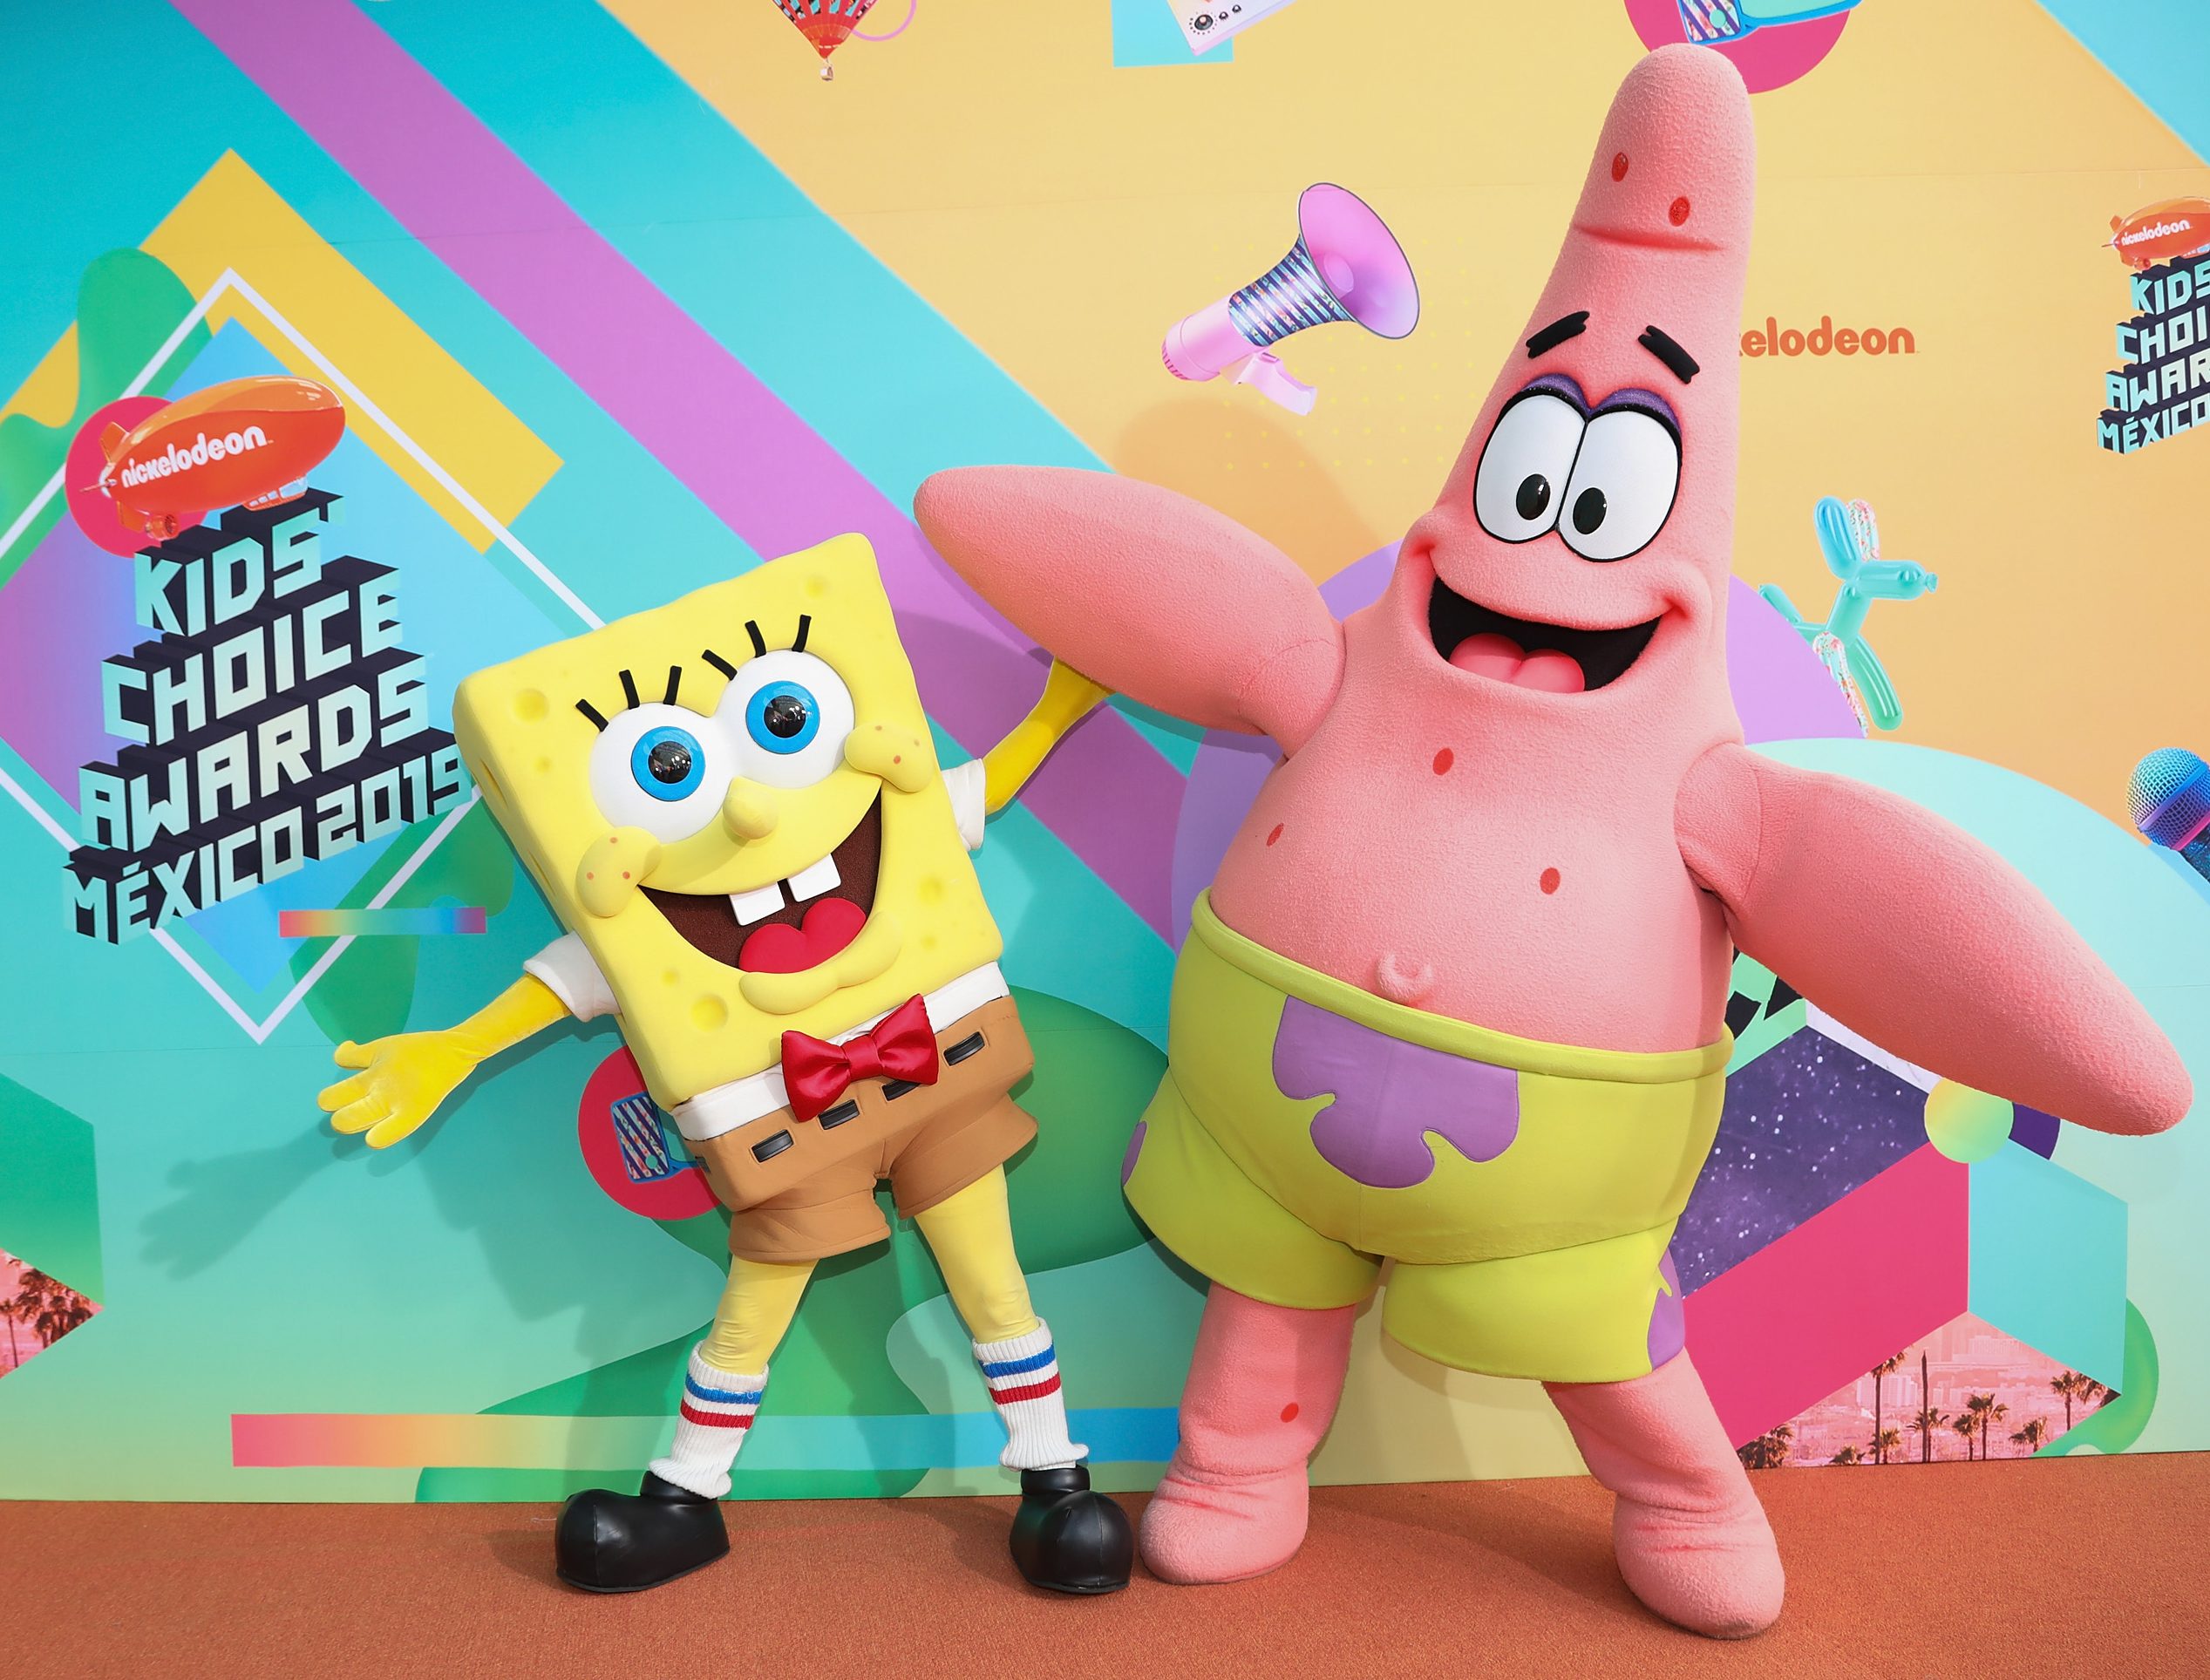 Spongebob Squarepants: Virus-themed episode pulled from air amid pandemic